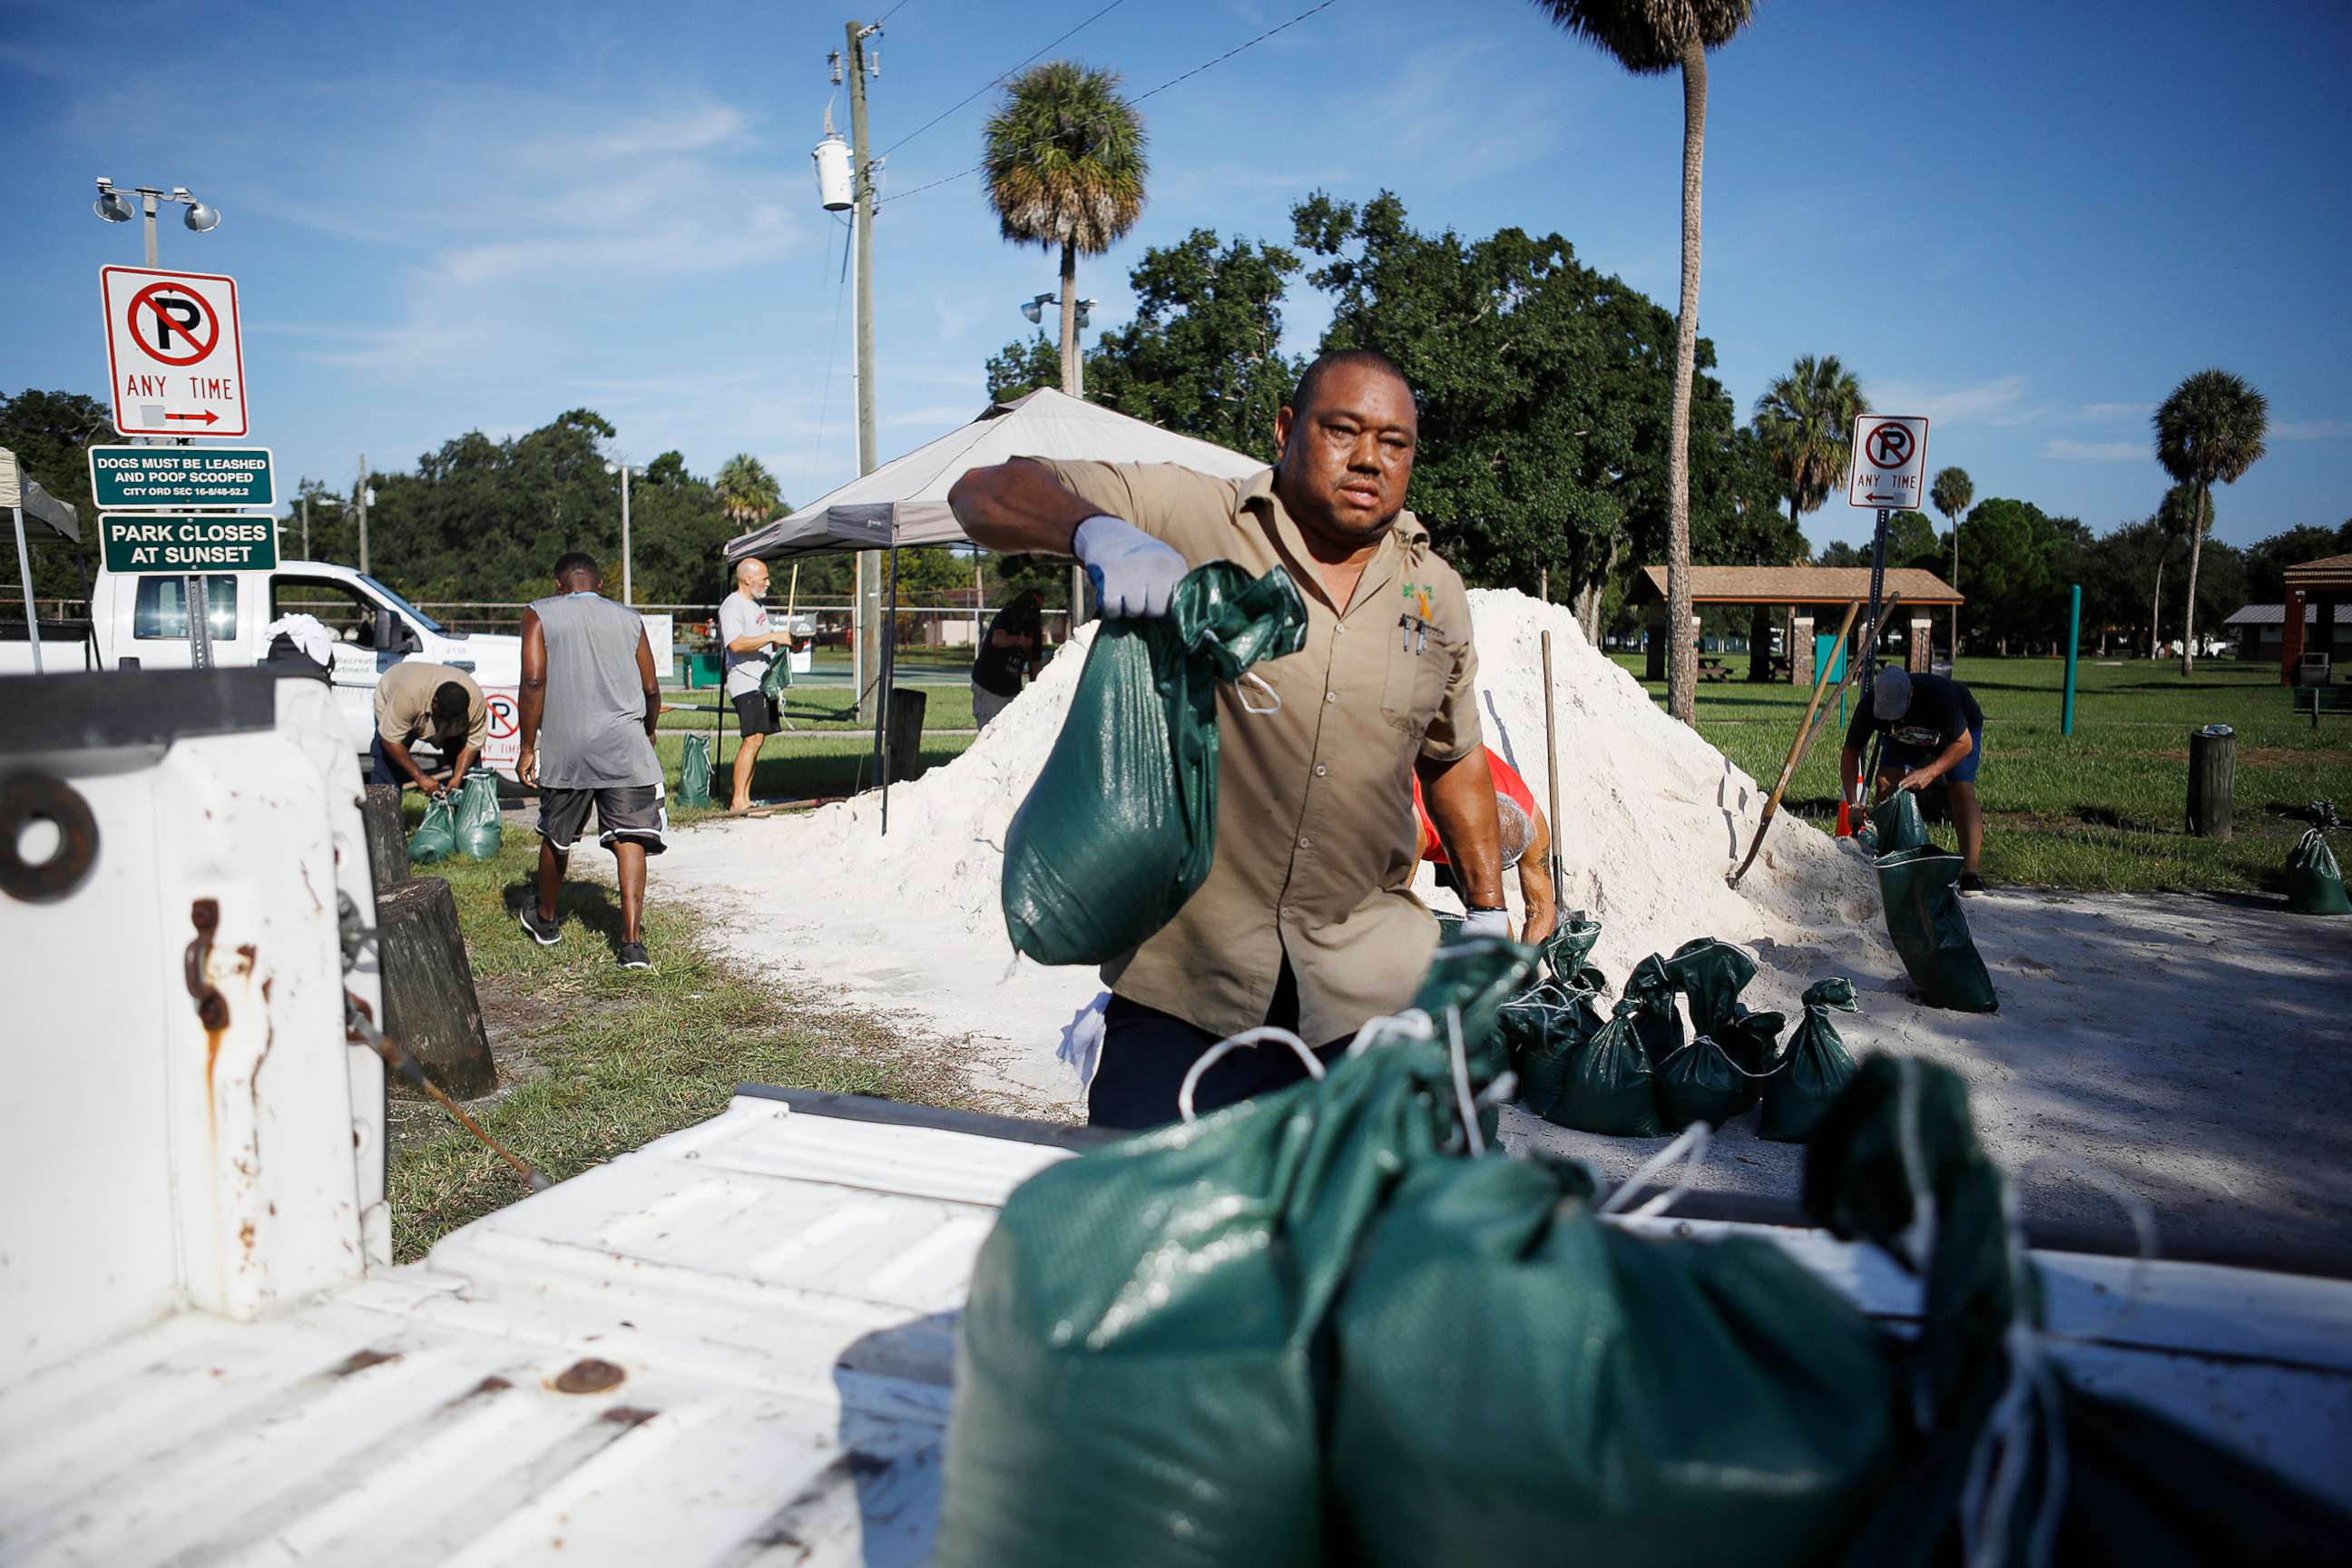 PHOTO: City of Tampa Parks & Recreation employee Rod McKinney helps Horace Whittington 61, of Tampa load sandbags in his truck for his mother 91-year-old mother in preparation for Hurricane Dorian at MacFarlane Park in Tampa, Fla., Aug. 29, 2019.